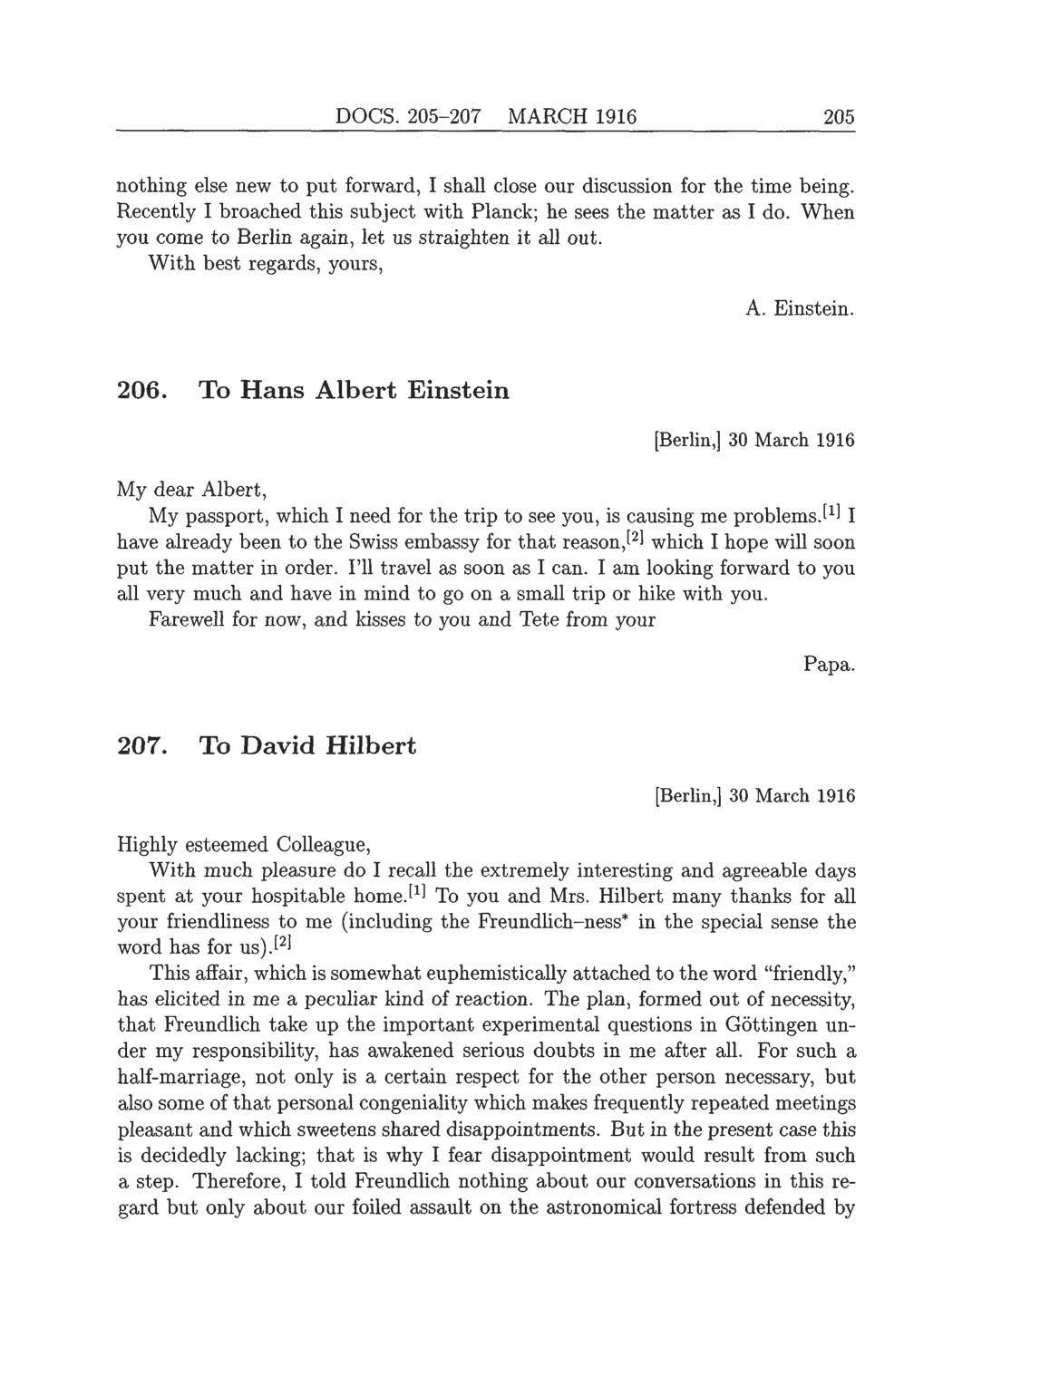 Volume 8: The Berlin Years: Correspondence, 1914-1918 (English translation supplement) page 205